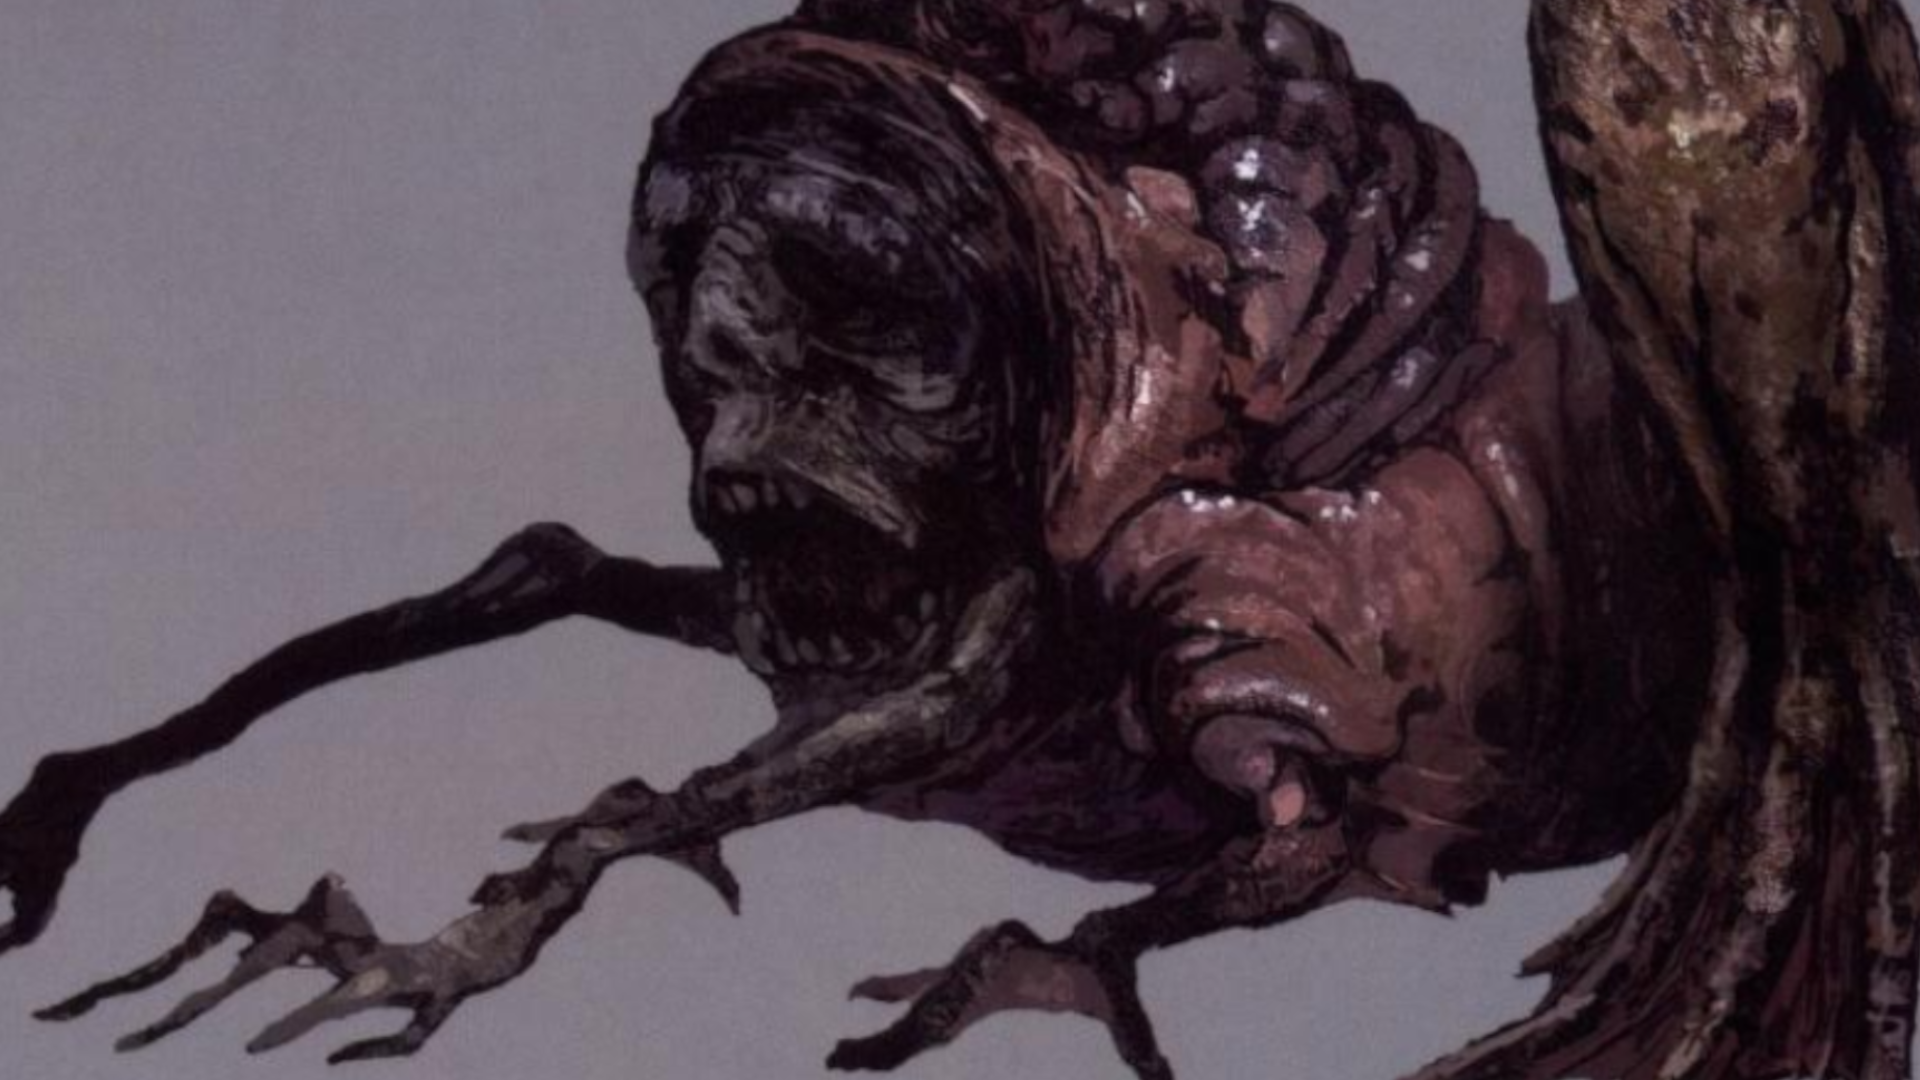 An image of the Demon of Song from Dark Souls 2, as featured in the Dark Souls 2 Design Works art book.